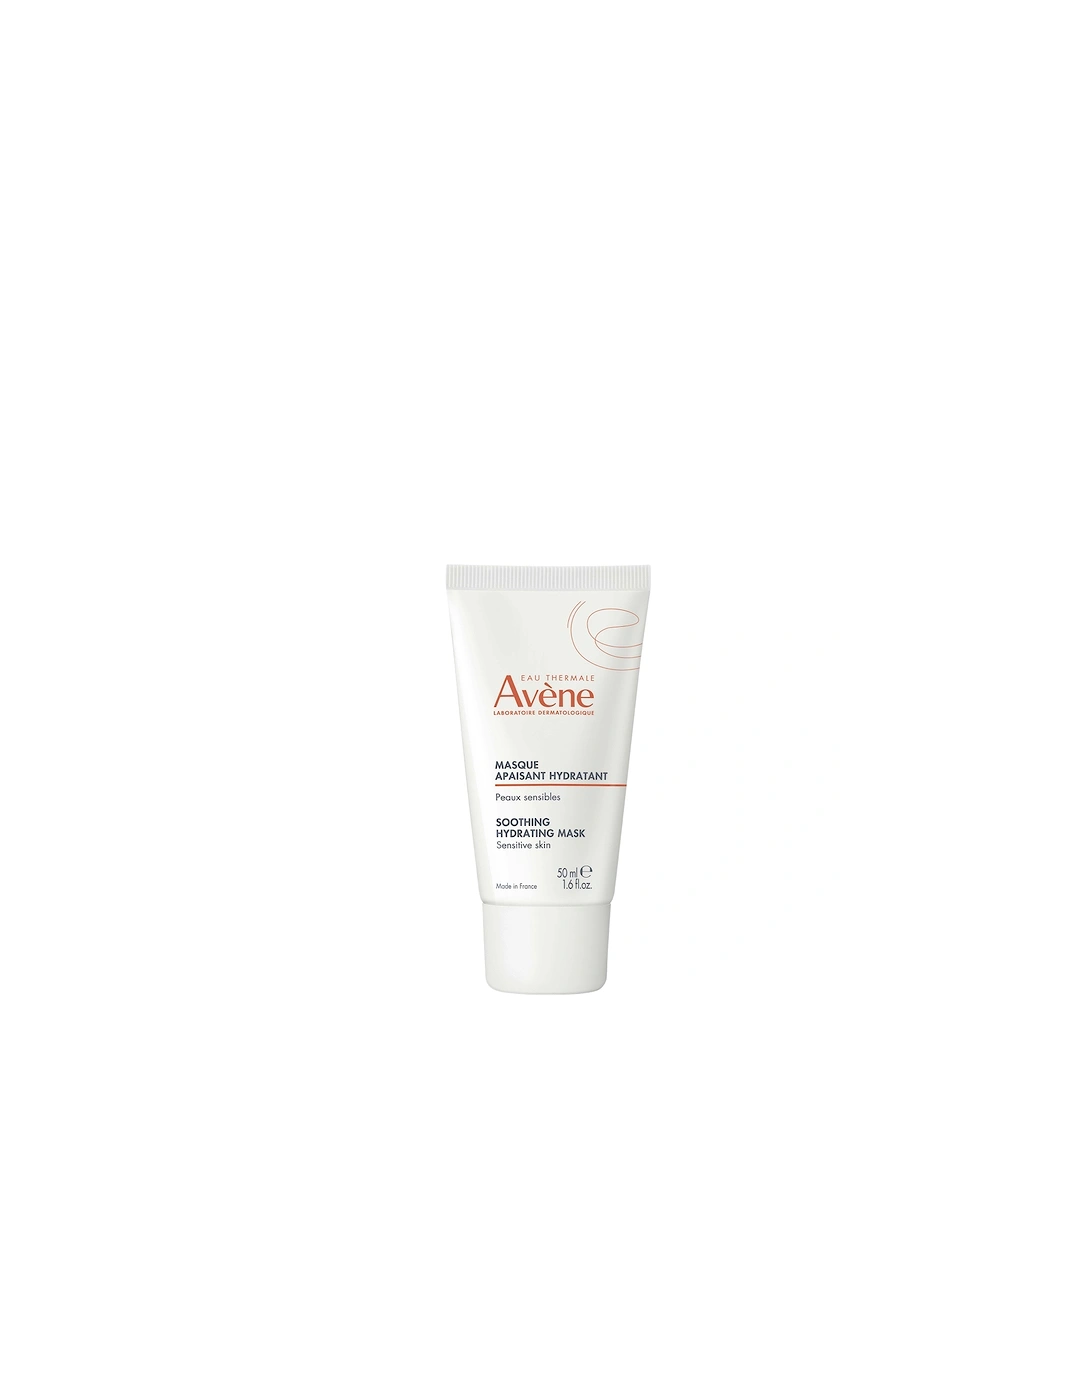 Avène Les Essentiels Soothing Hydrating Mask for Sensitive Skin 50ml, 2 of 1